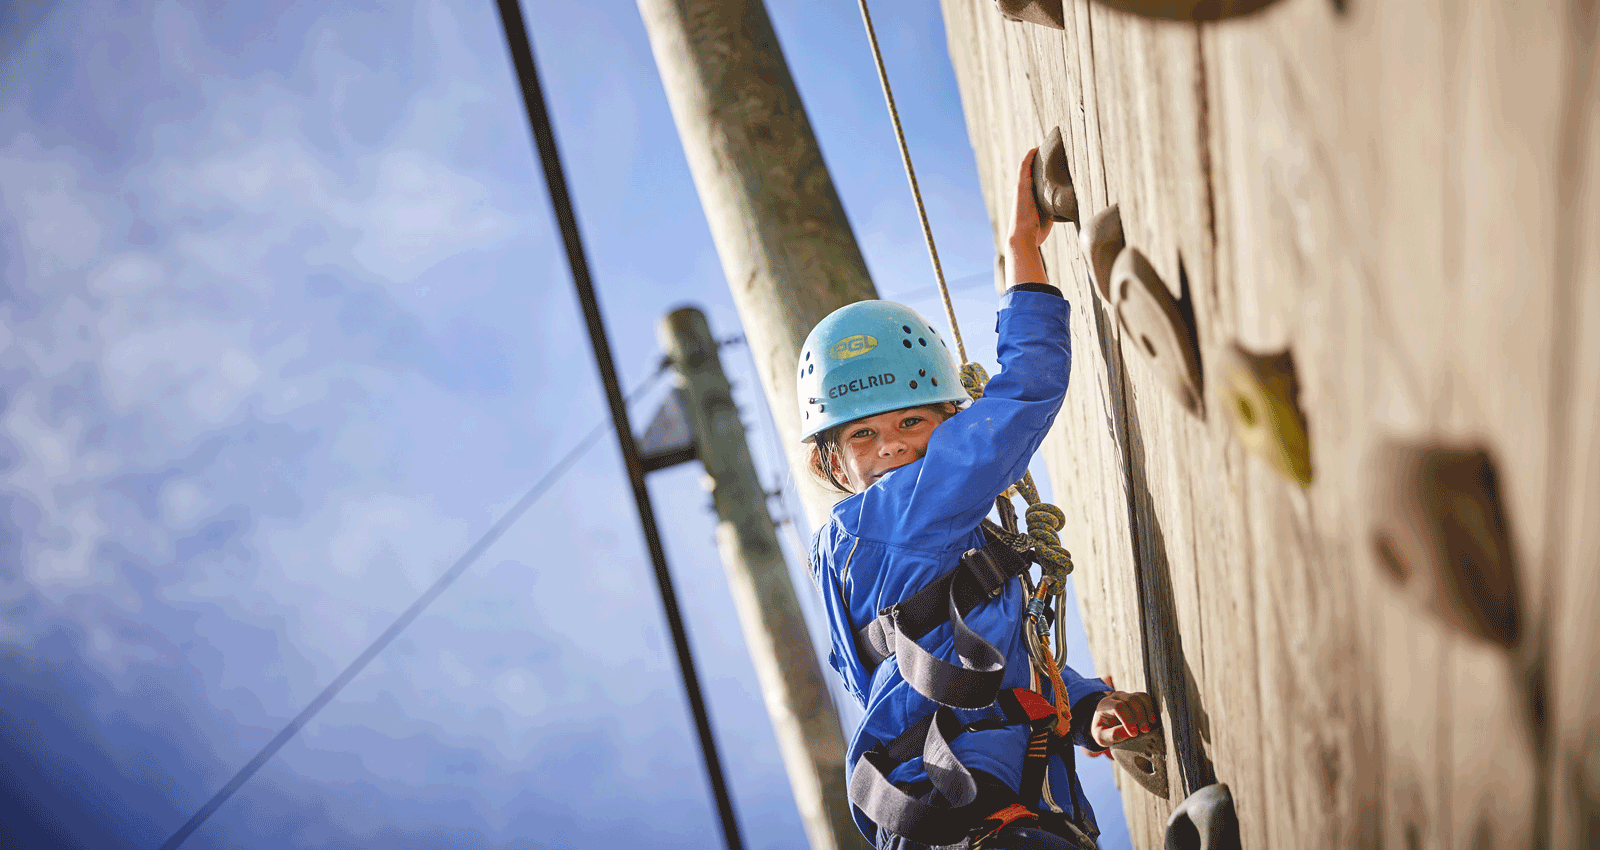 PGL Adventure Holidays - Multi-Activity Holidays and Summer Camps across the UK - Introductory Adventures - First Timers